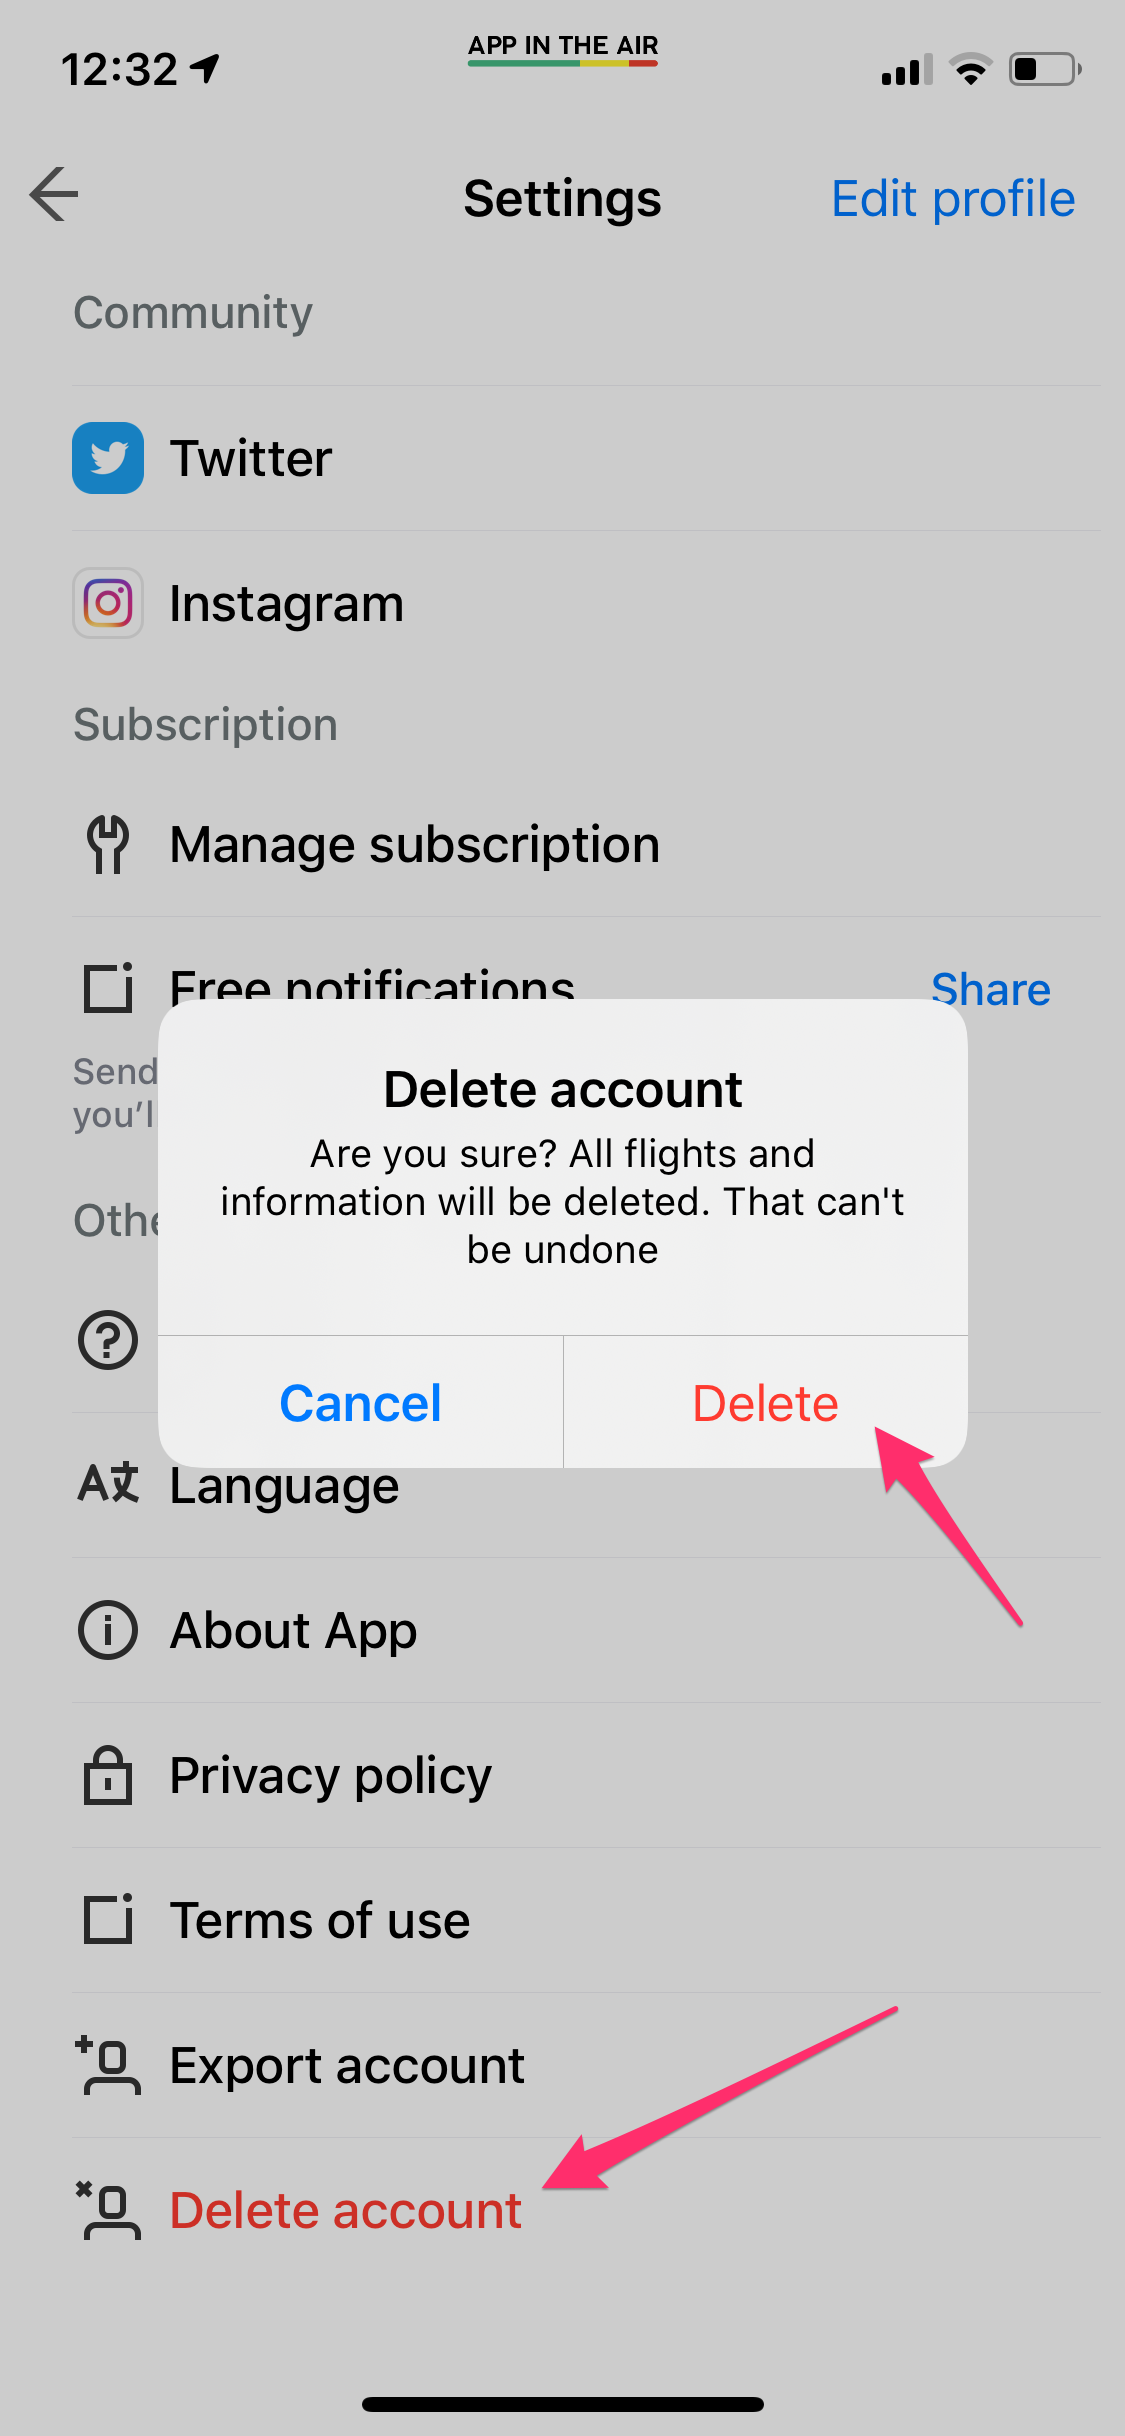 How can I delete my account? – App in the Air